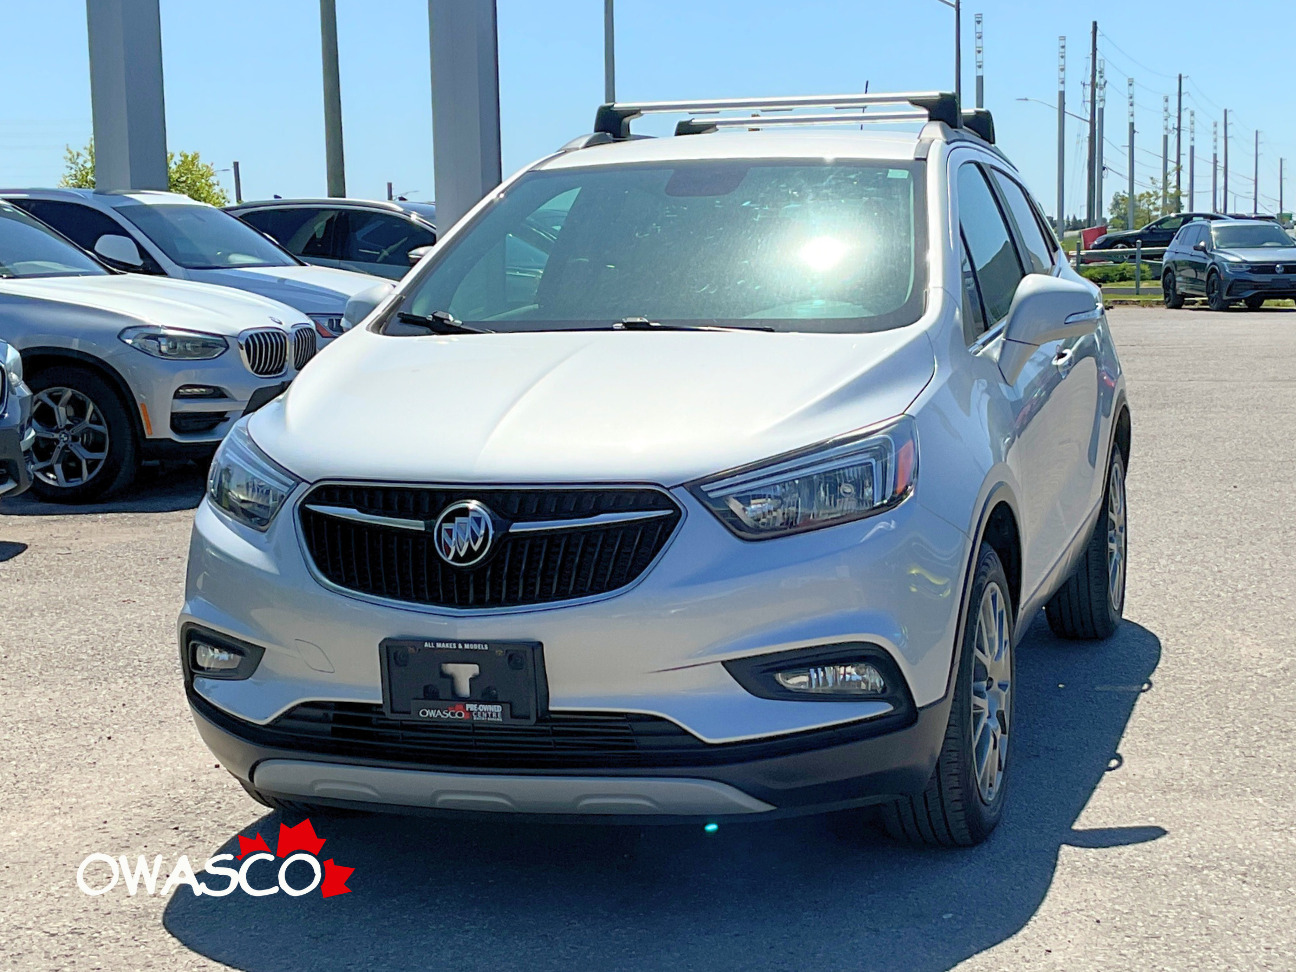 2019 Buick Encore 1.4L Nice and Clean! One Owner! Well Maintained!